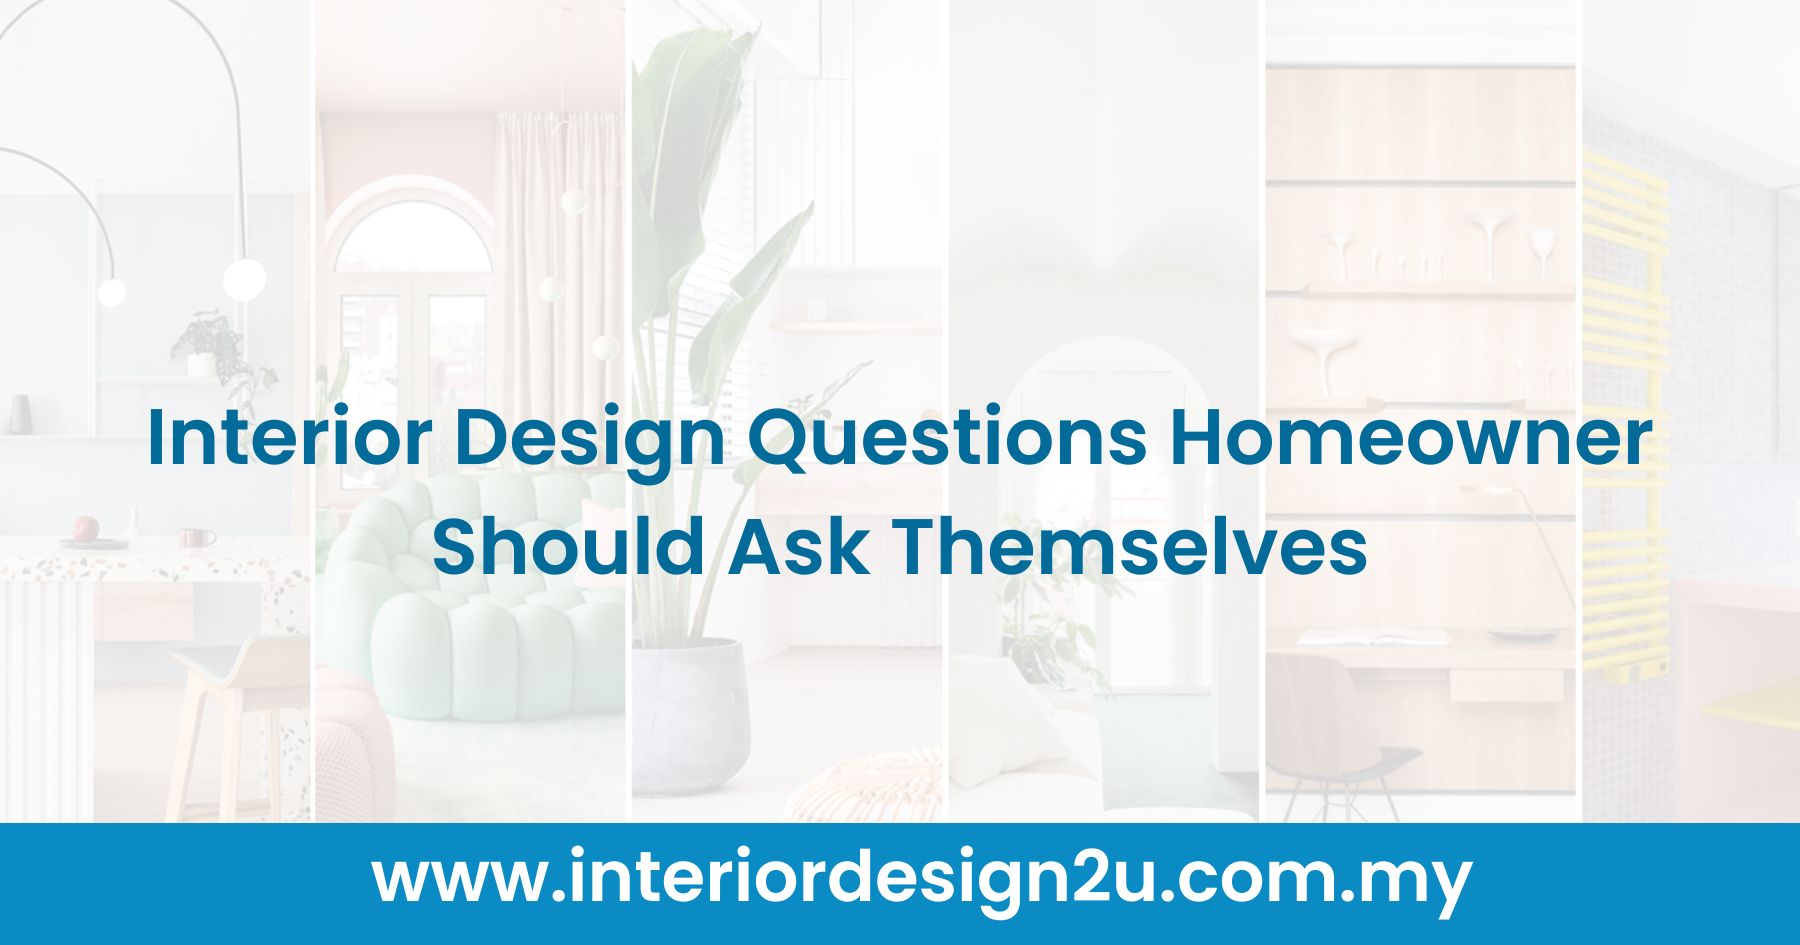 Interior Design Questions Homeowner Should Ask Themselves